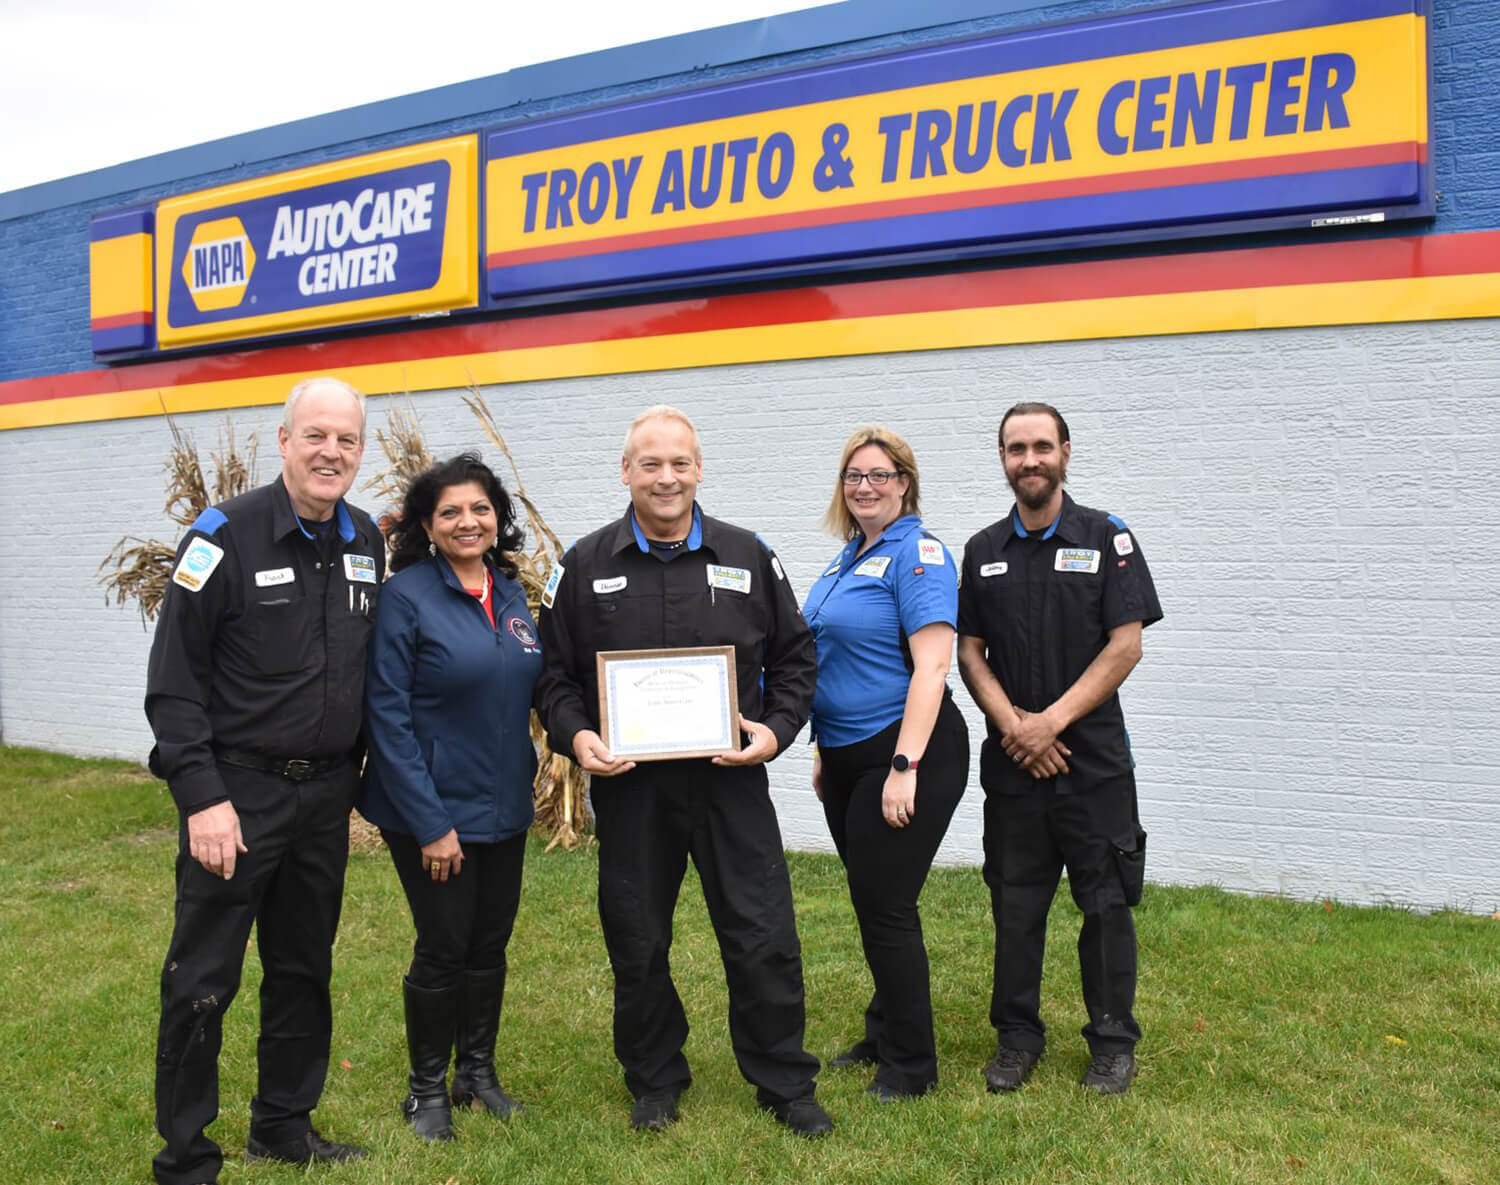 Photo Gallery - Troy Auto Care Image 38